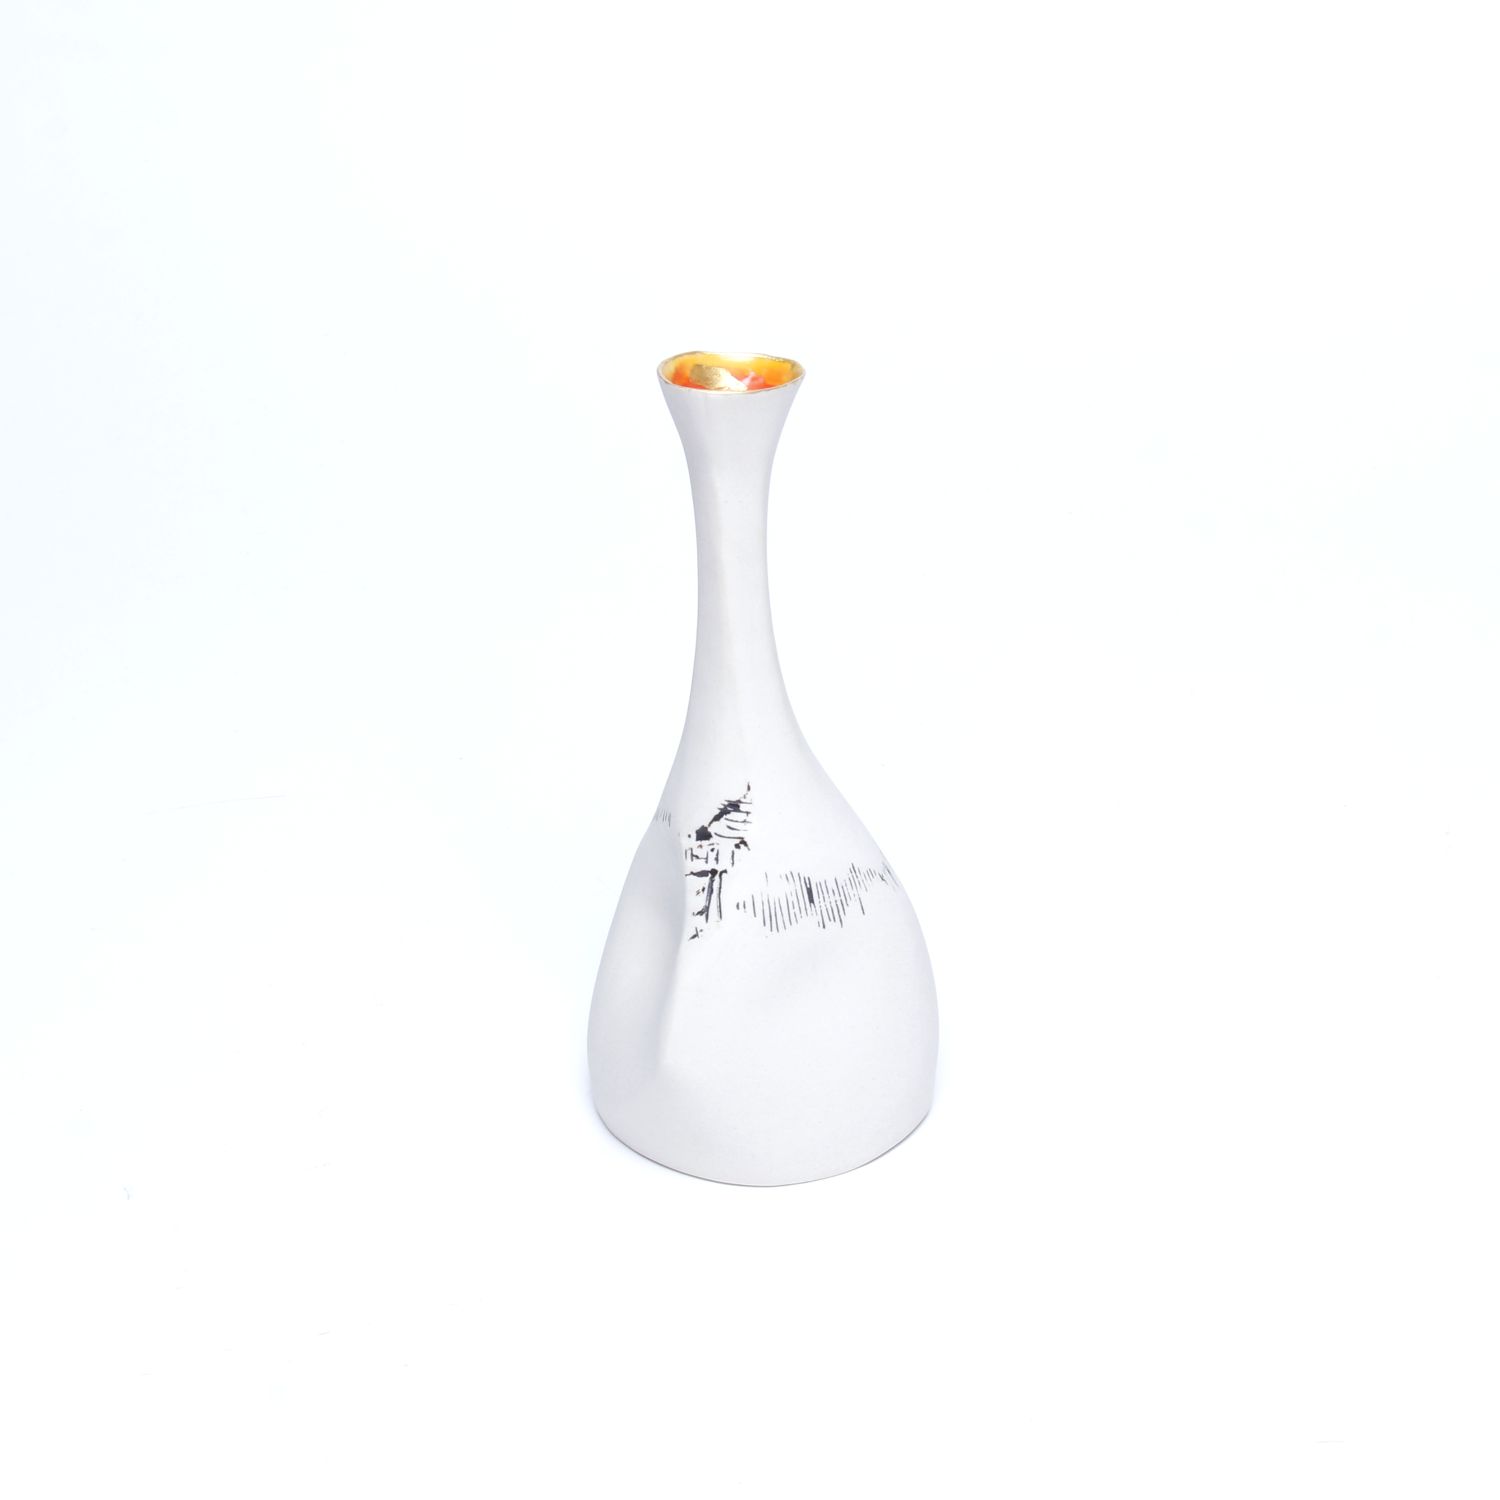 Jane Wilson: Vase (Each sold separately) Product Image 5 of 9